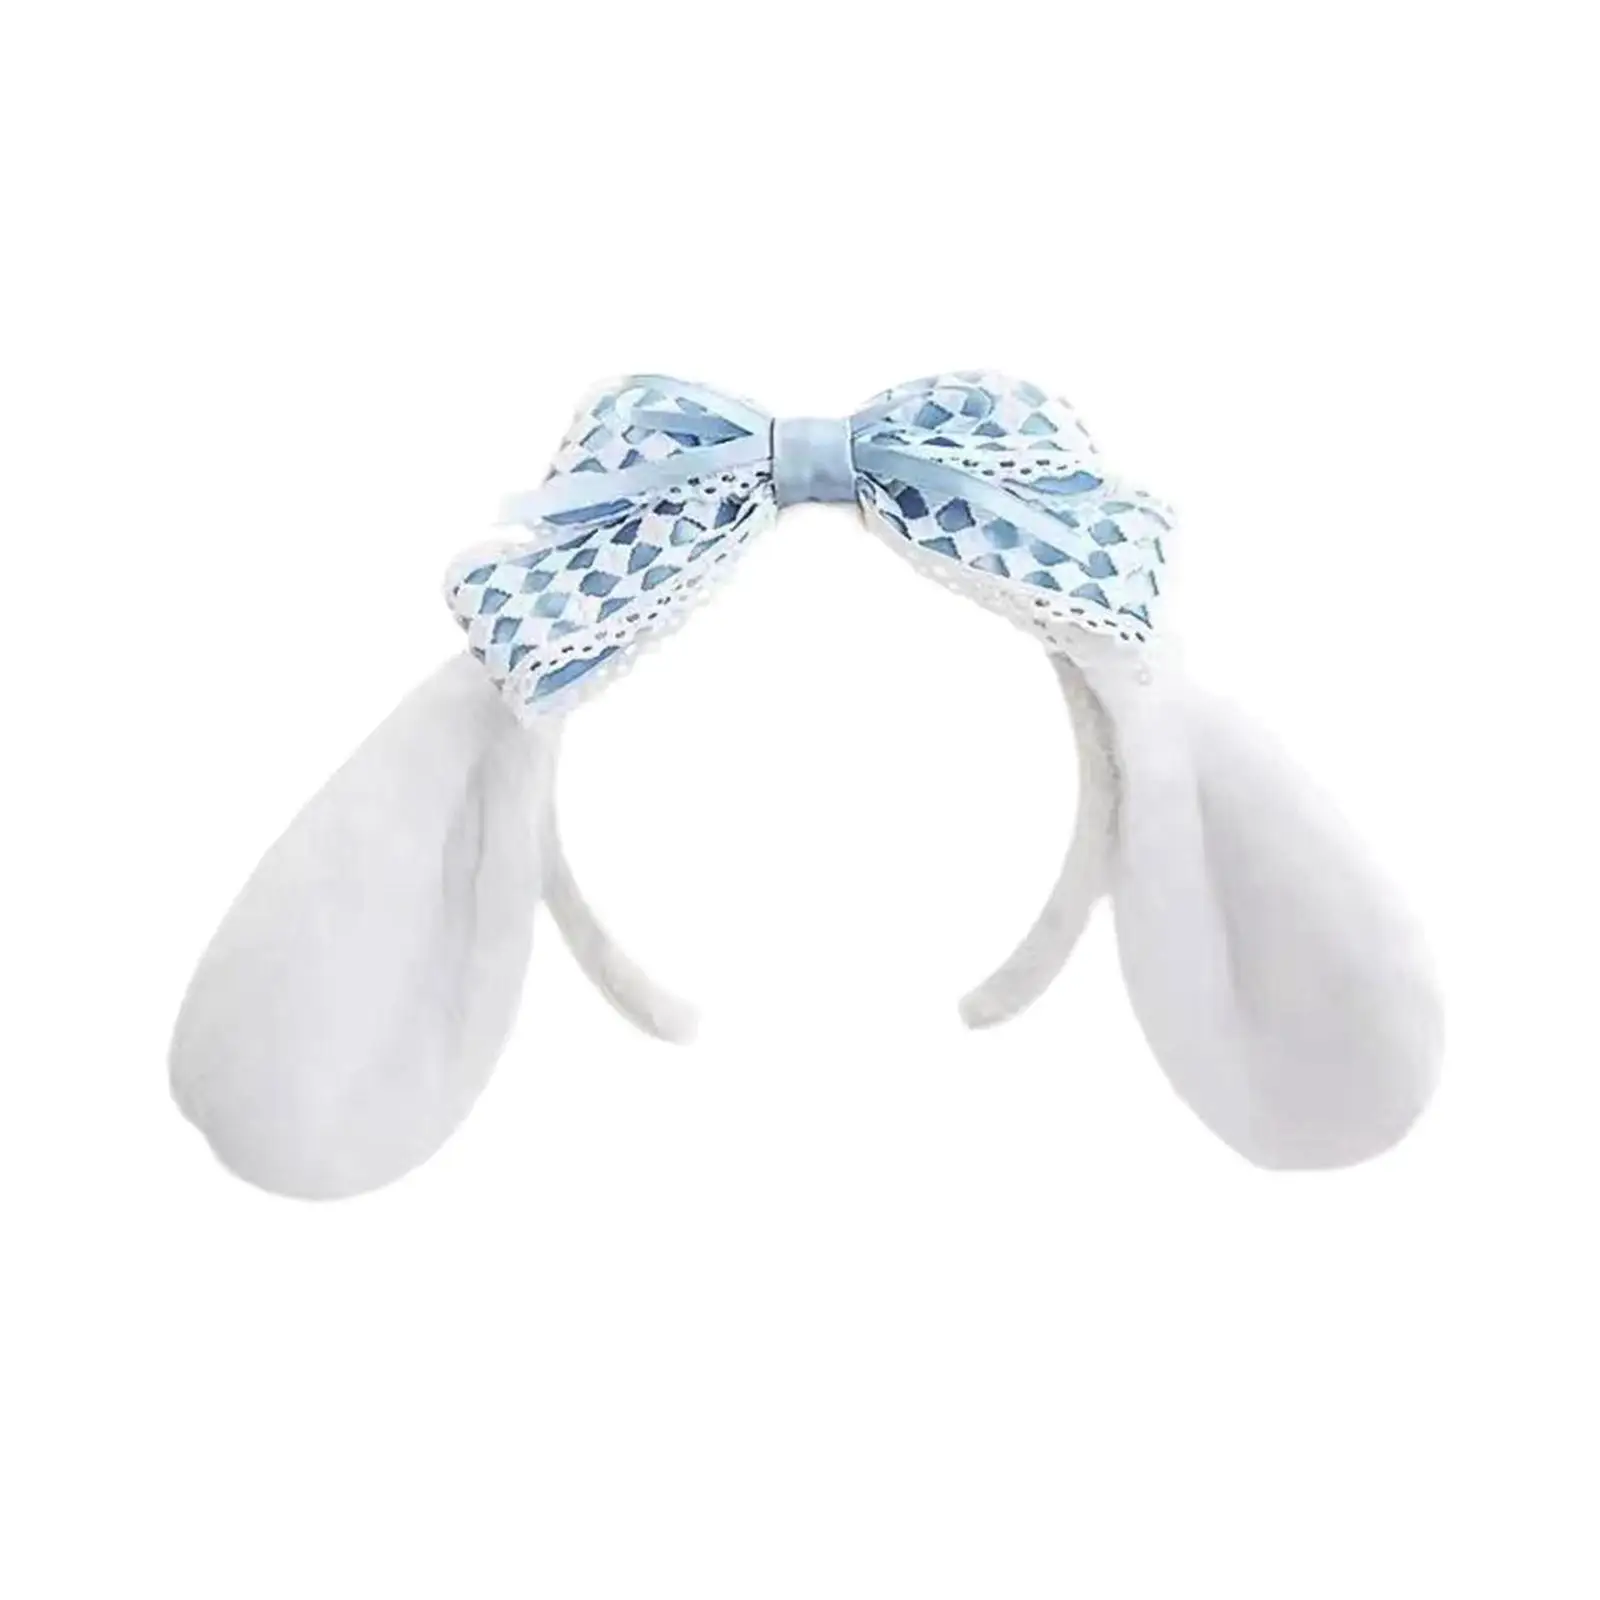 Easter Ears Headband Photo Props Hairband for Stage Performance Decor